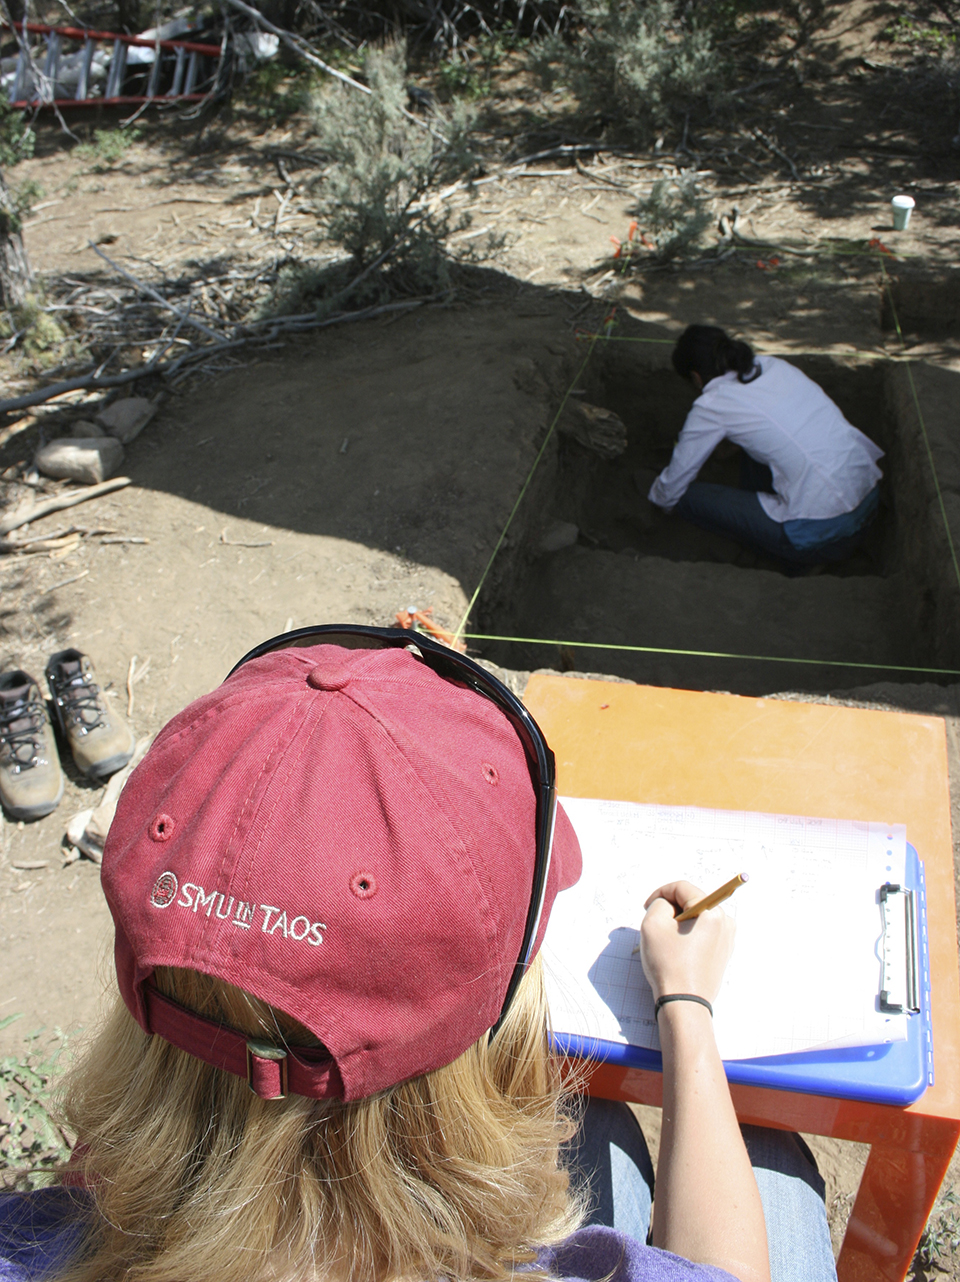 One SMU-in-Taos student takes notes on a clipboard as another digs in a roped off area of the ground.